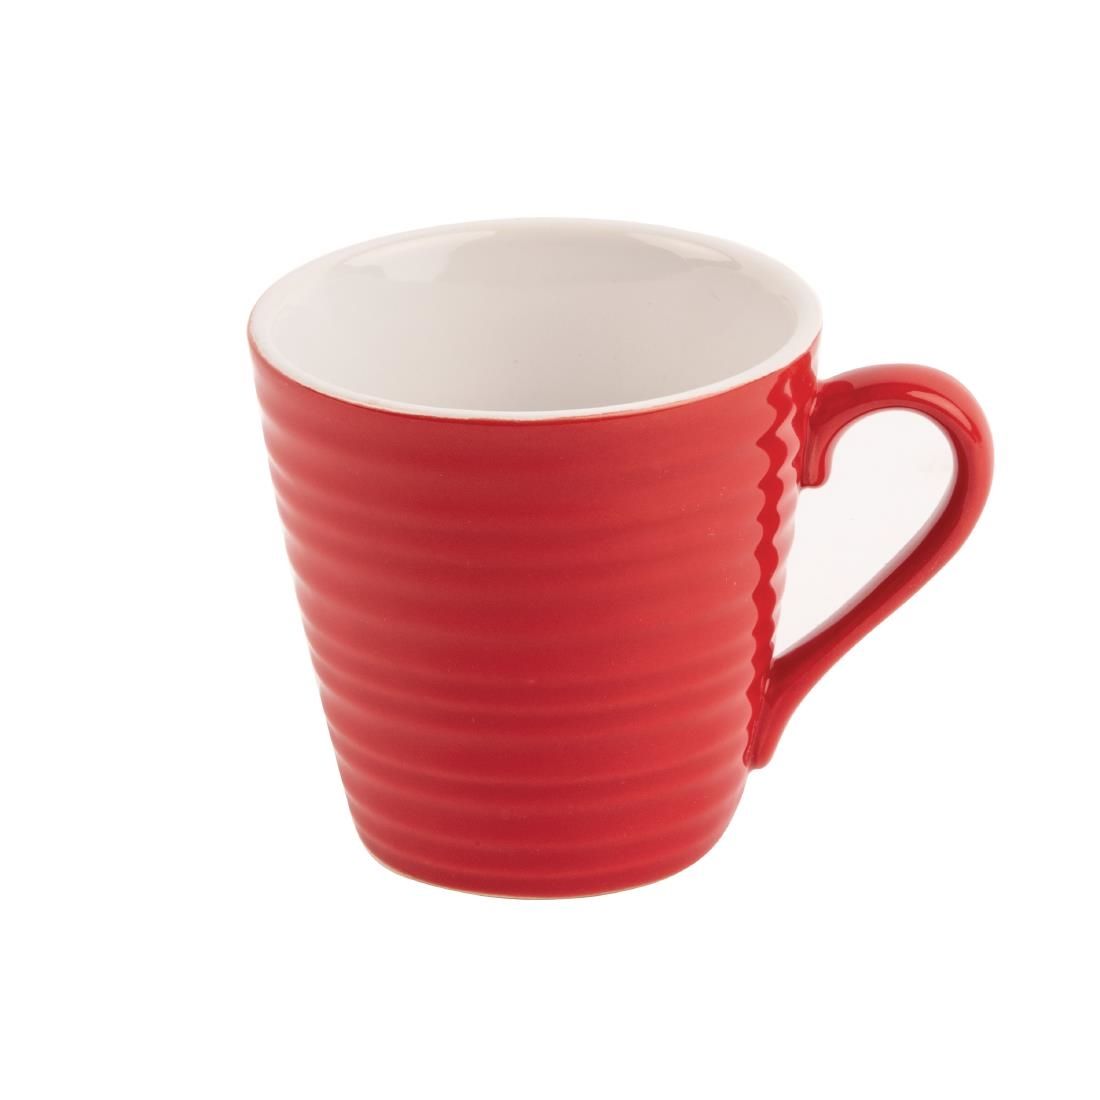 DH632 Olympia CafÃƒÂ© Aroma Mugs Red 340ml (Pack of 6)